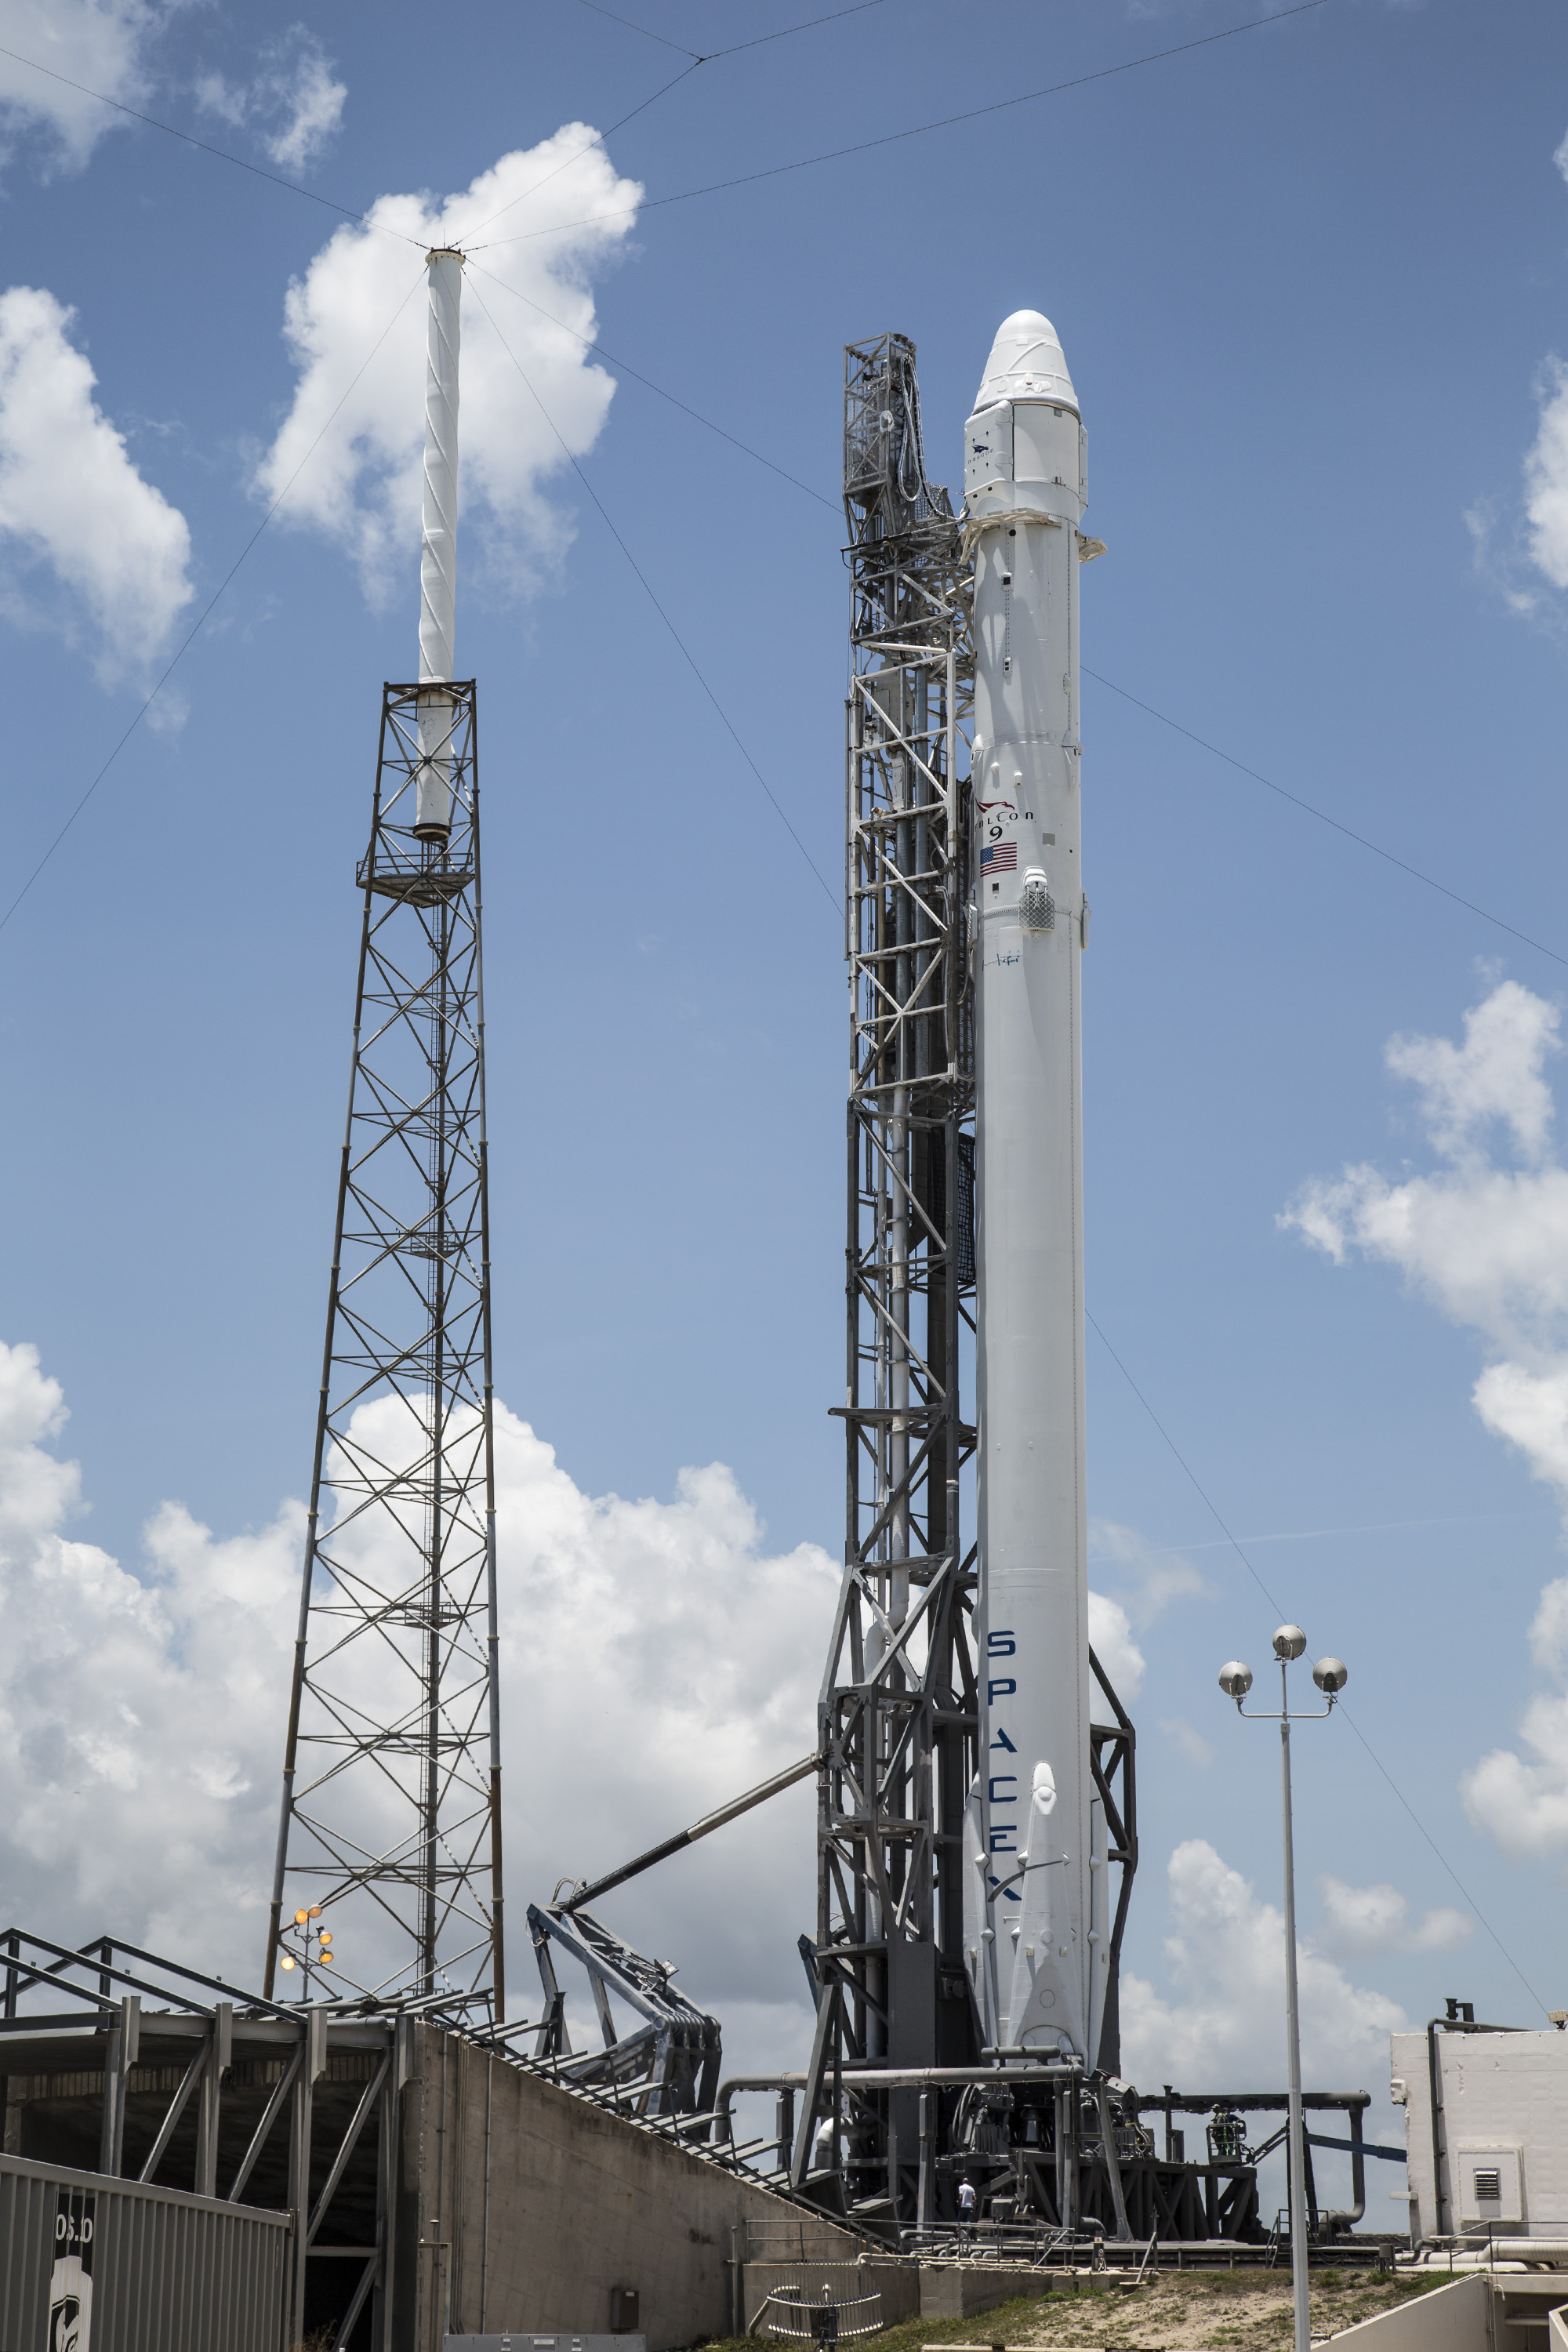 CRS-7 on the pad before its fateful launch